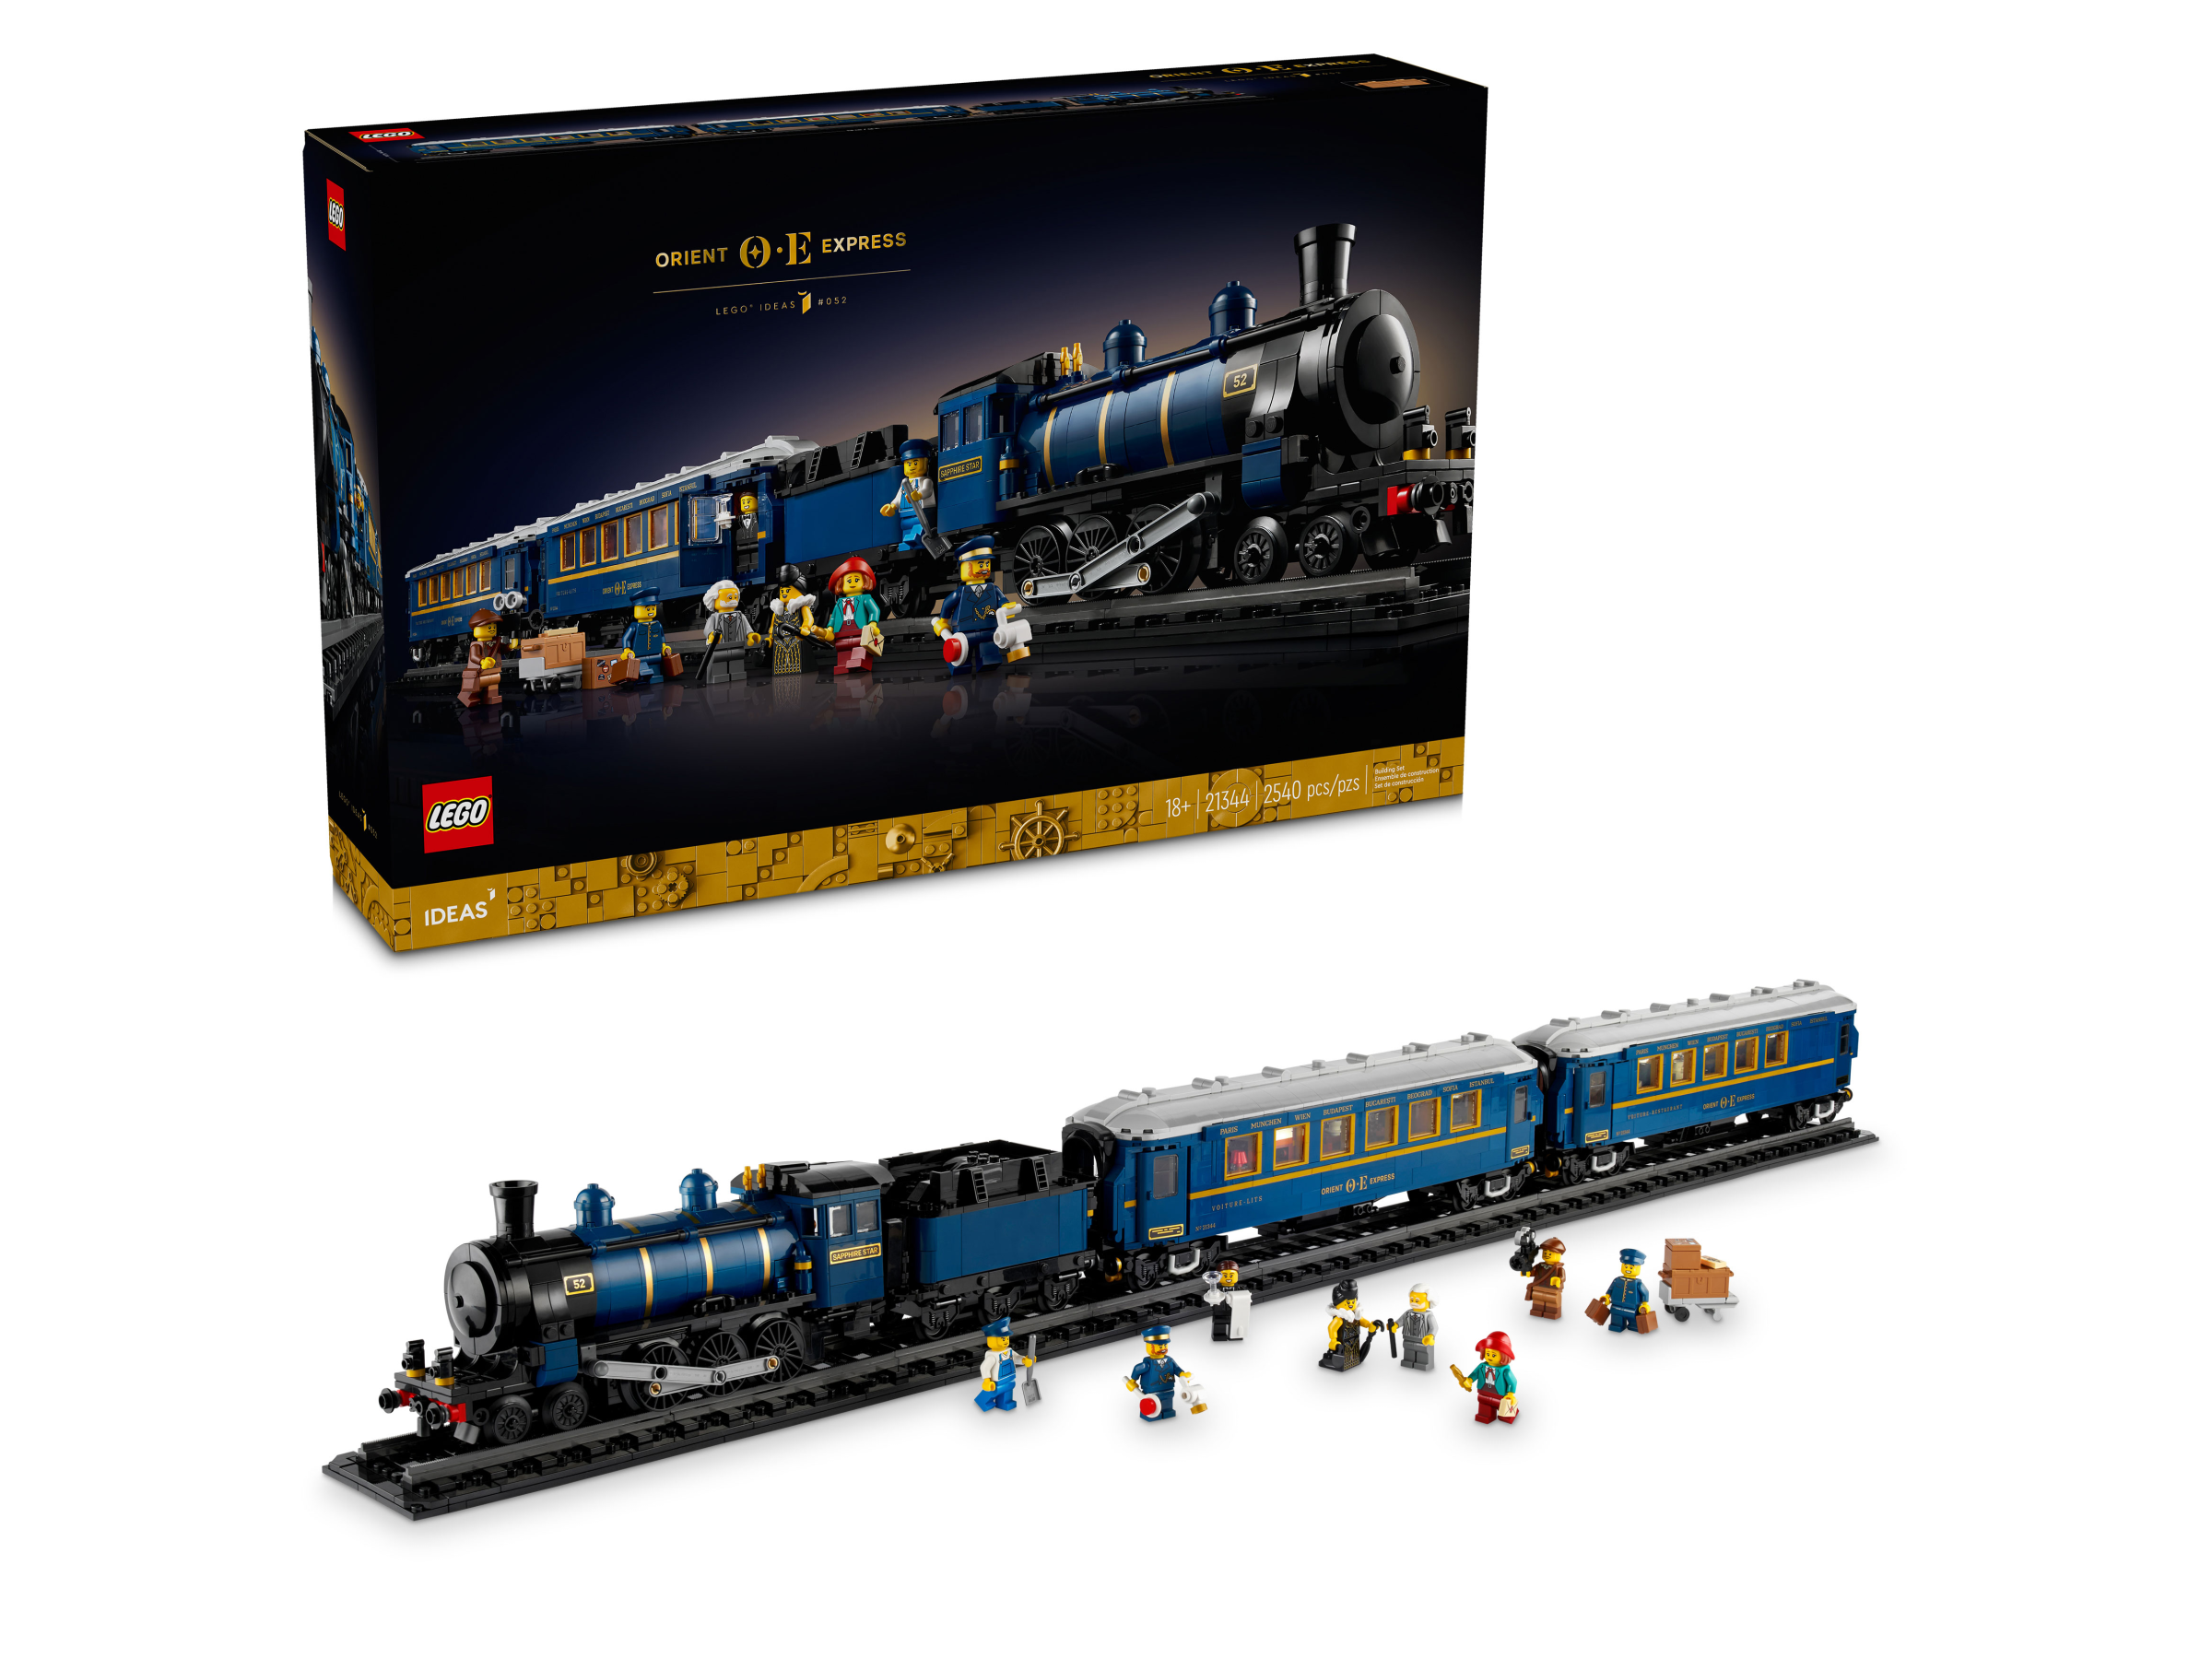 Set Review ➟ 31244 LEGO<sup>®</sup> Orient Express